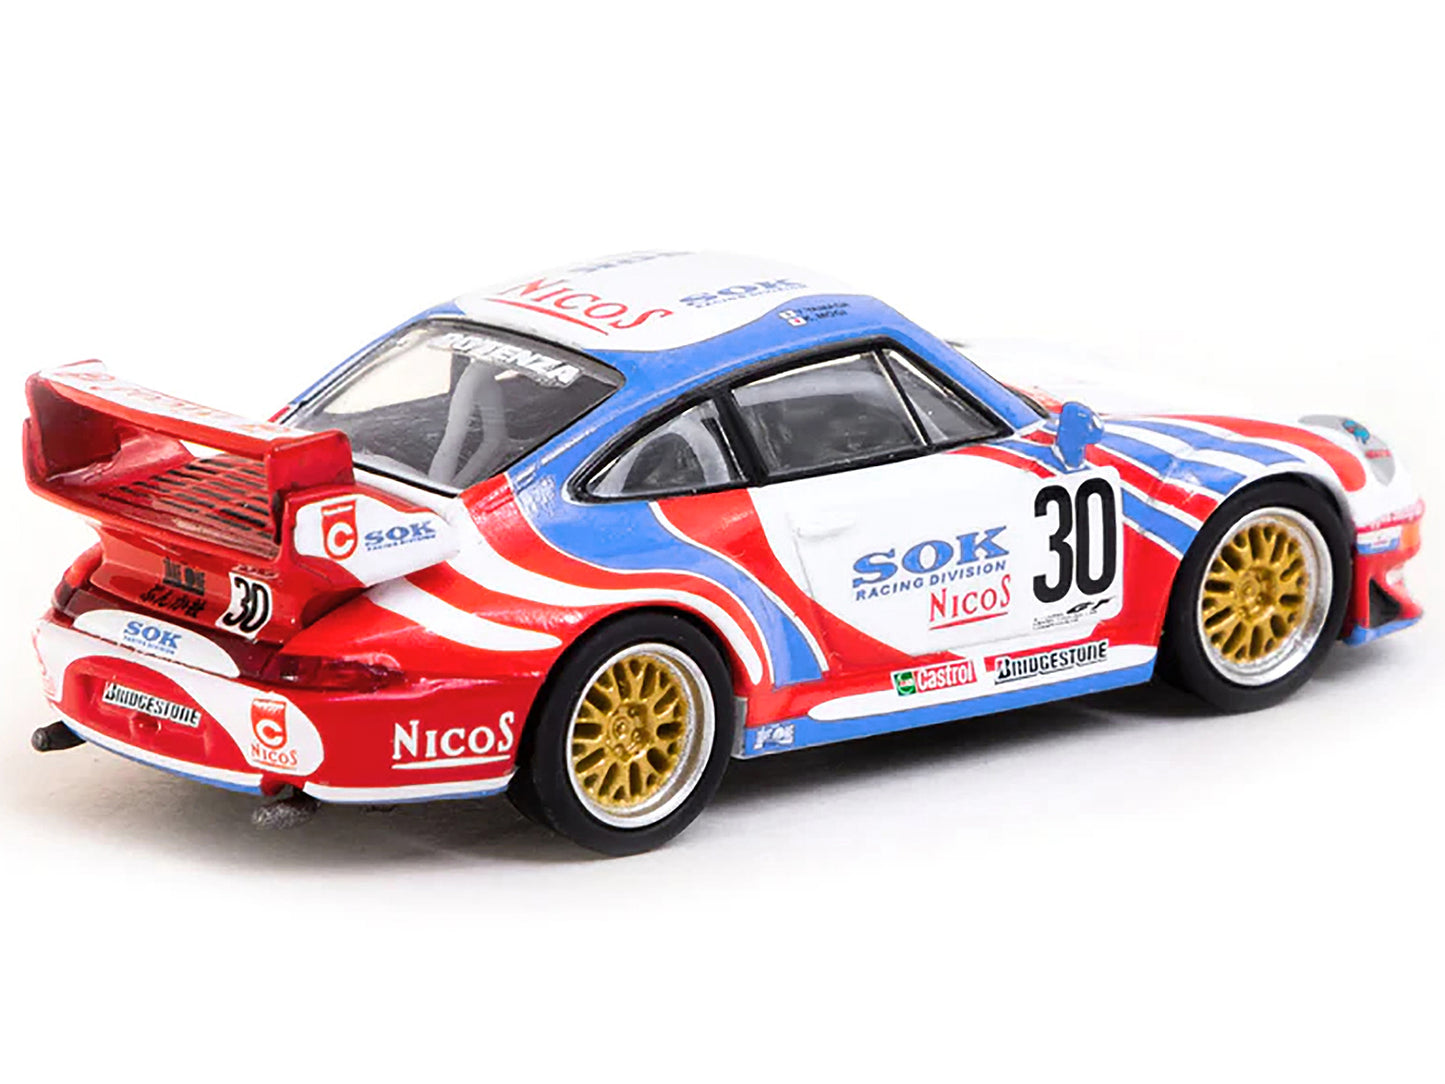 Porsche 911 GT2 #30 "Sohgo-Keibi" White with Red and Blue Graphics "Collab64" Series 1/64 Diecast Model Car by Schuco & Tarmac Works